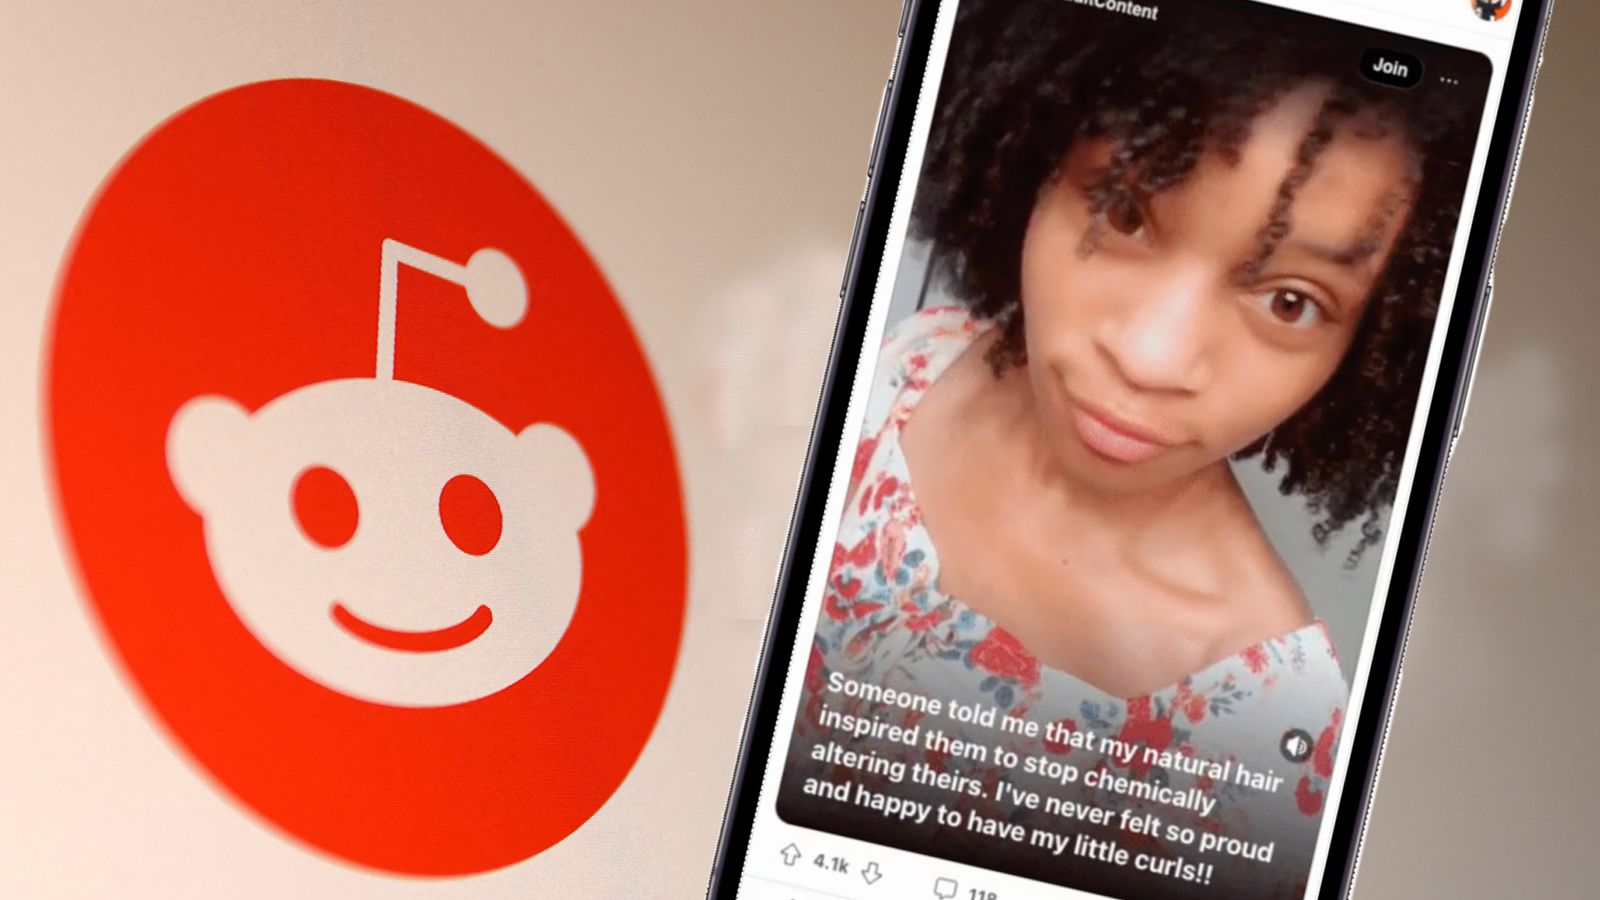 Big changes are coming to Reddit - and some users really aren't happy